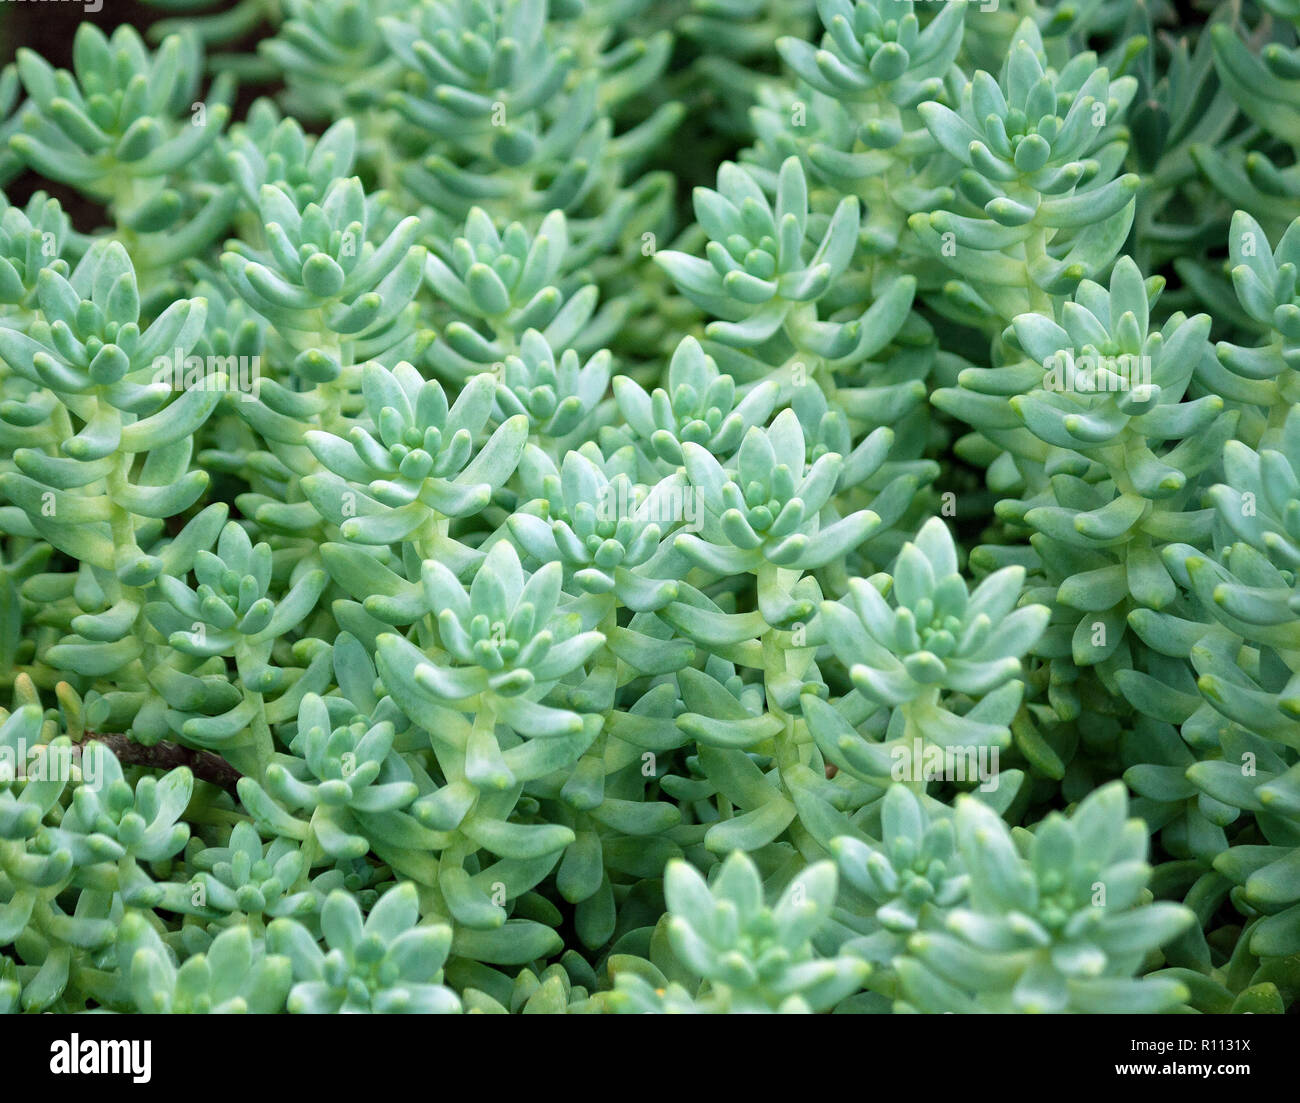 sedum treleasei succulent plant with pale blue green, thick and fleshy leaves, many plants growing in the garden, leaves occupy the whole picture Stock Photo